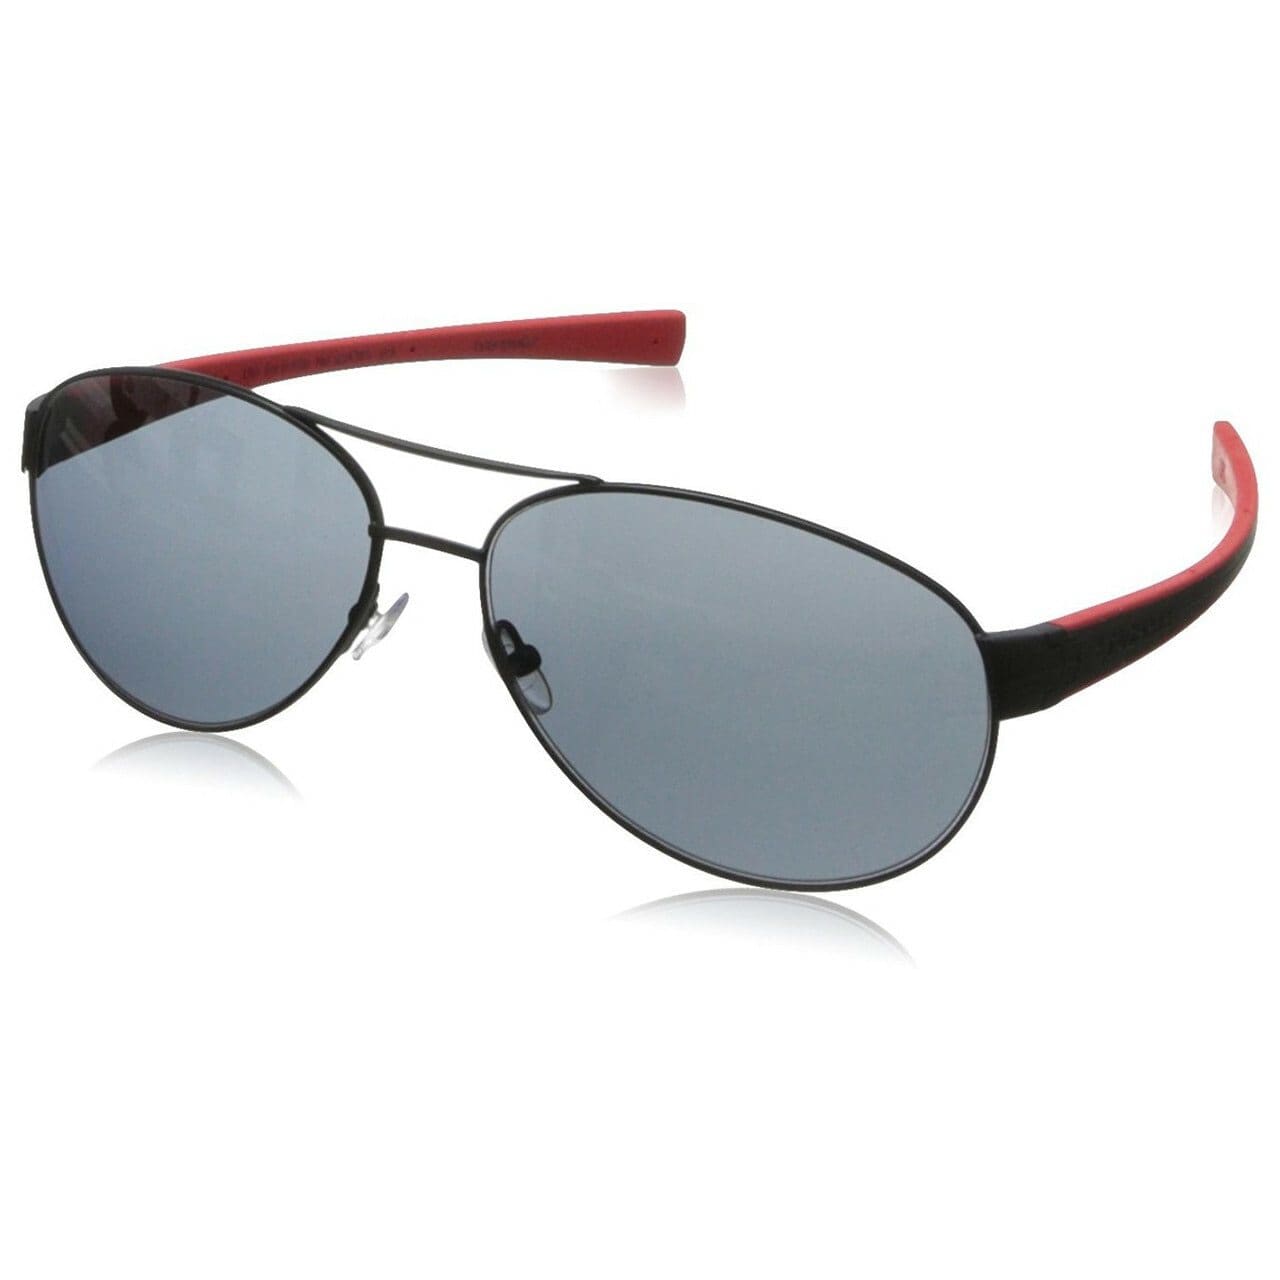 TAG Heuer LRS 0256 110 Sunglasses Black / Red Frame With Grey Outdoor Lens 660256110621503